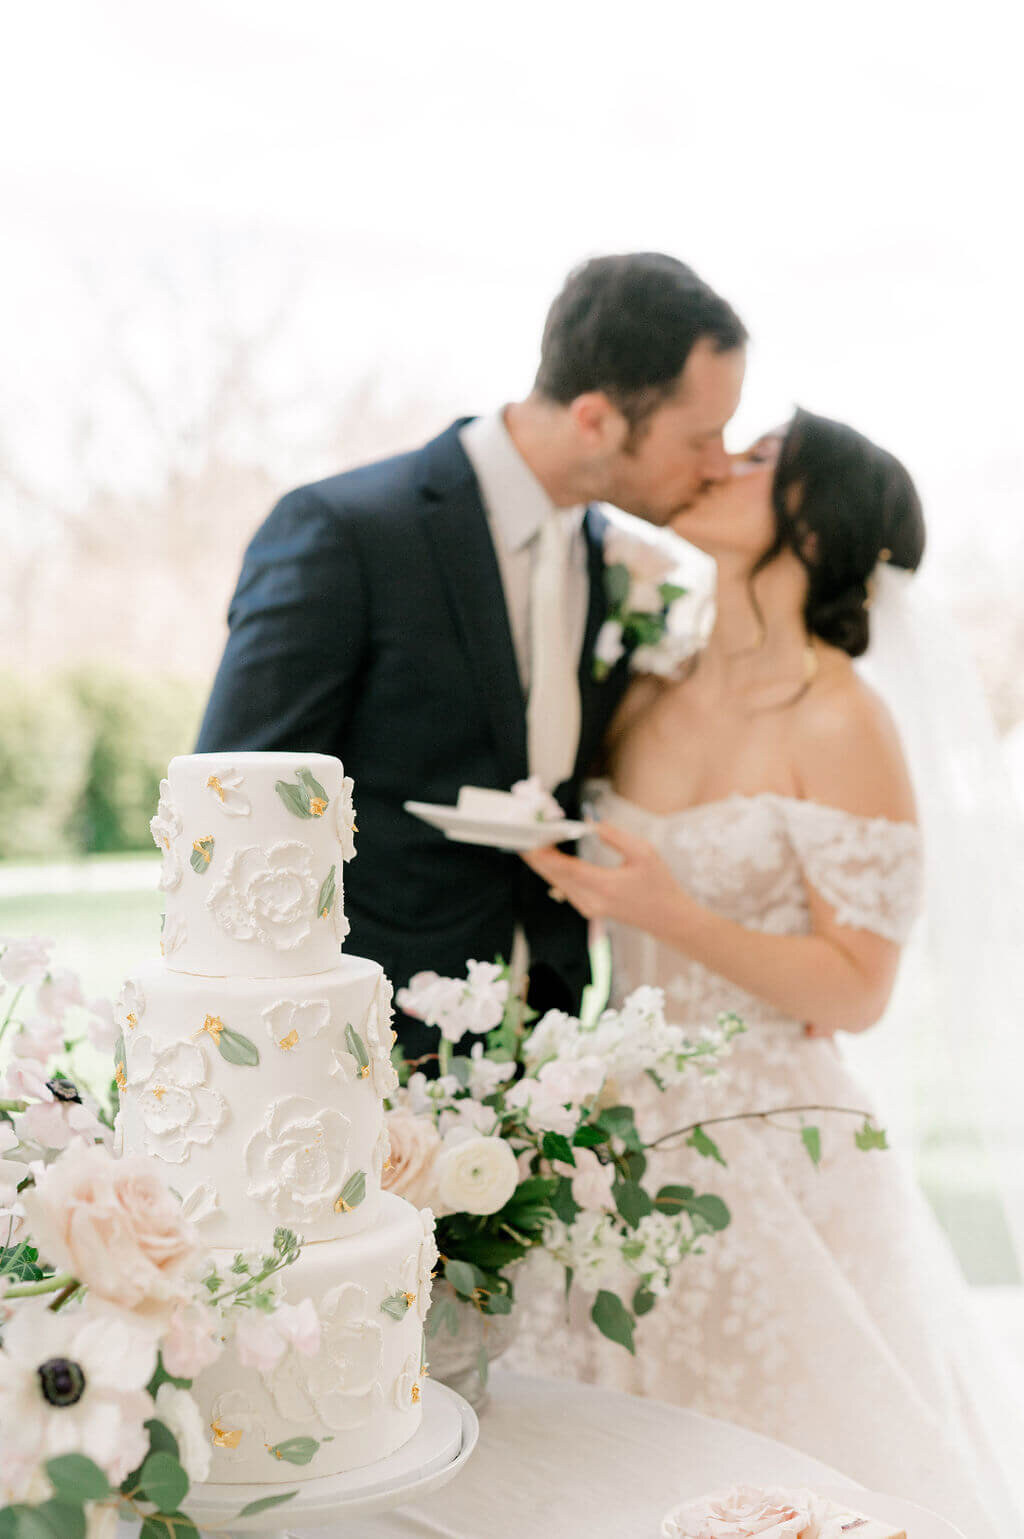 Bride and groom kissing in front of wedding cake for wedding photography by Virginia Photographer, Rachael Mattio